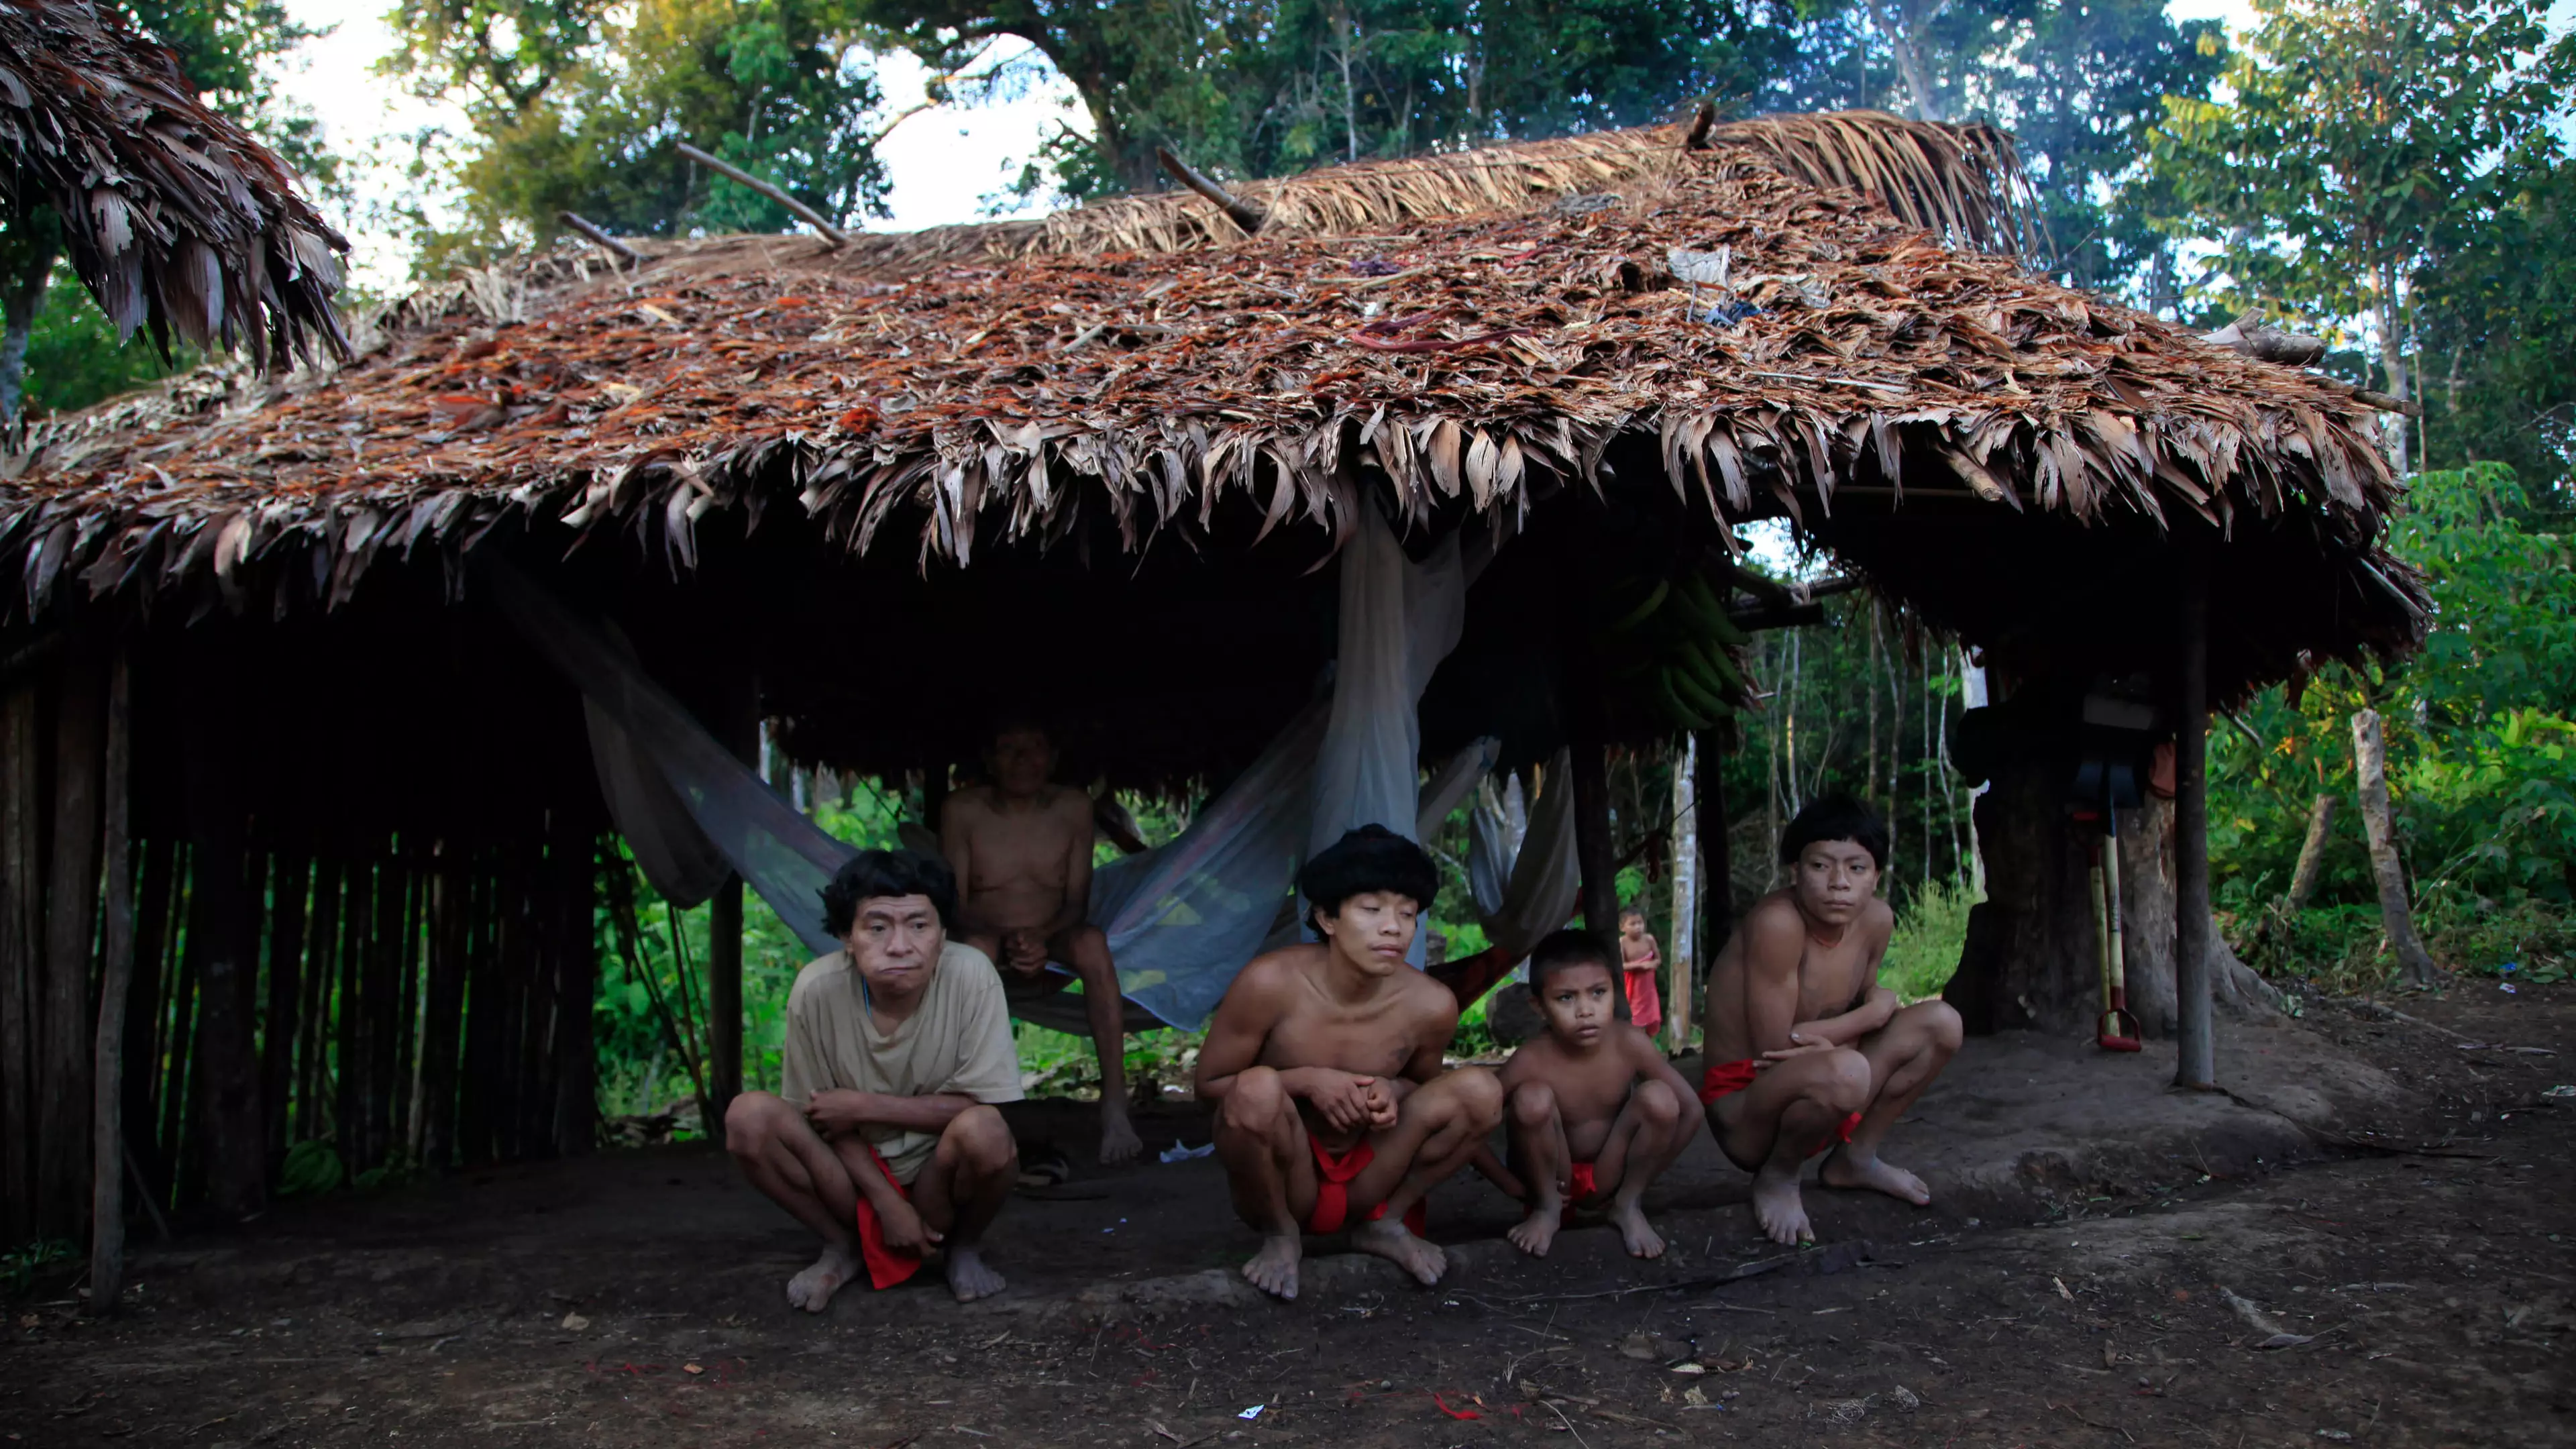 Brazilian Indigenous People Campaign To Remove Gold Miners From Their Land